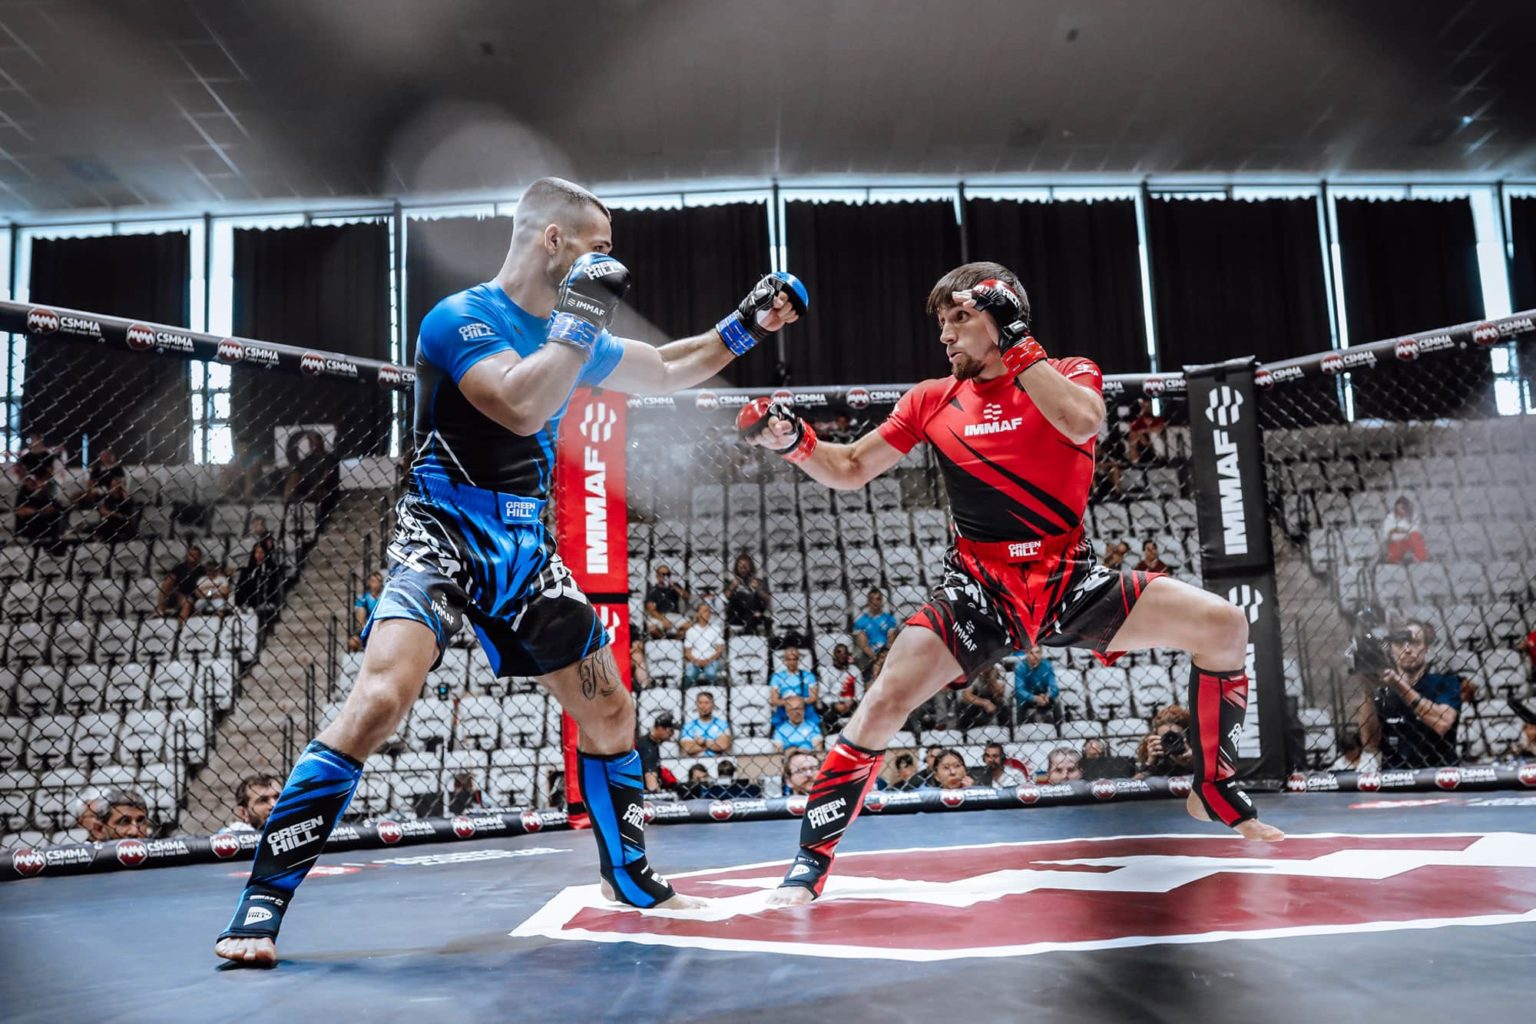 Certified Cuts Team Assigned To 2017 Immaf World